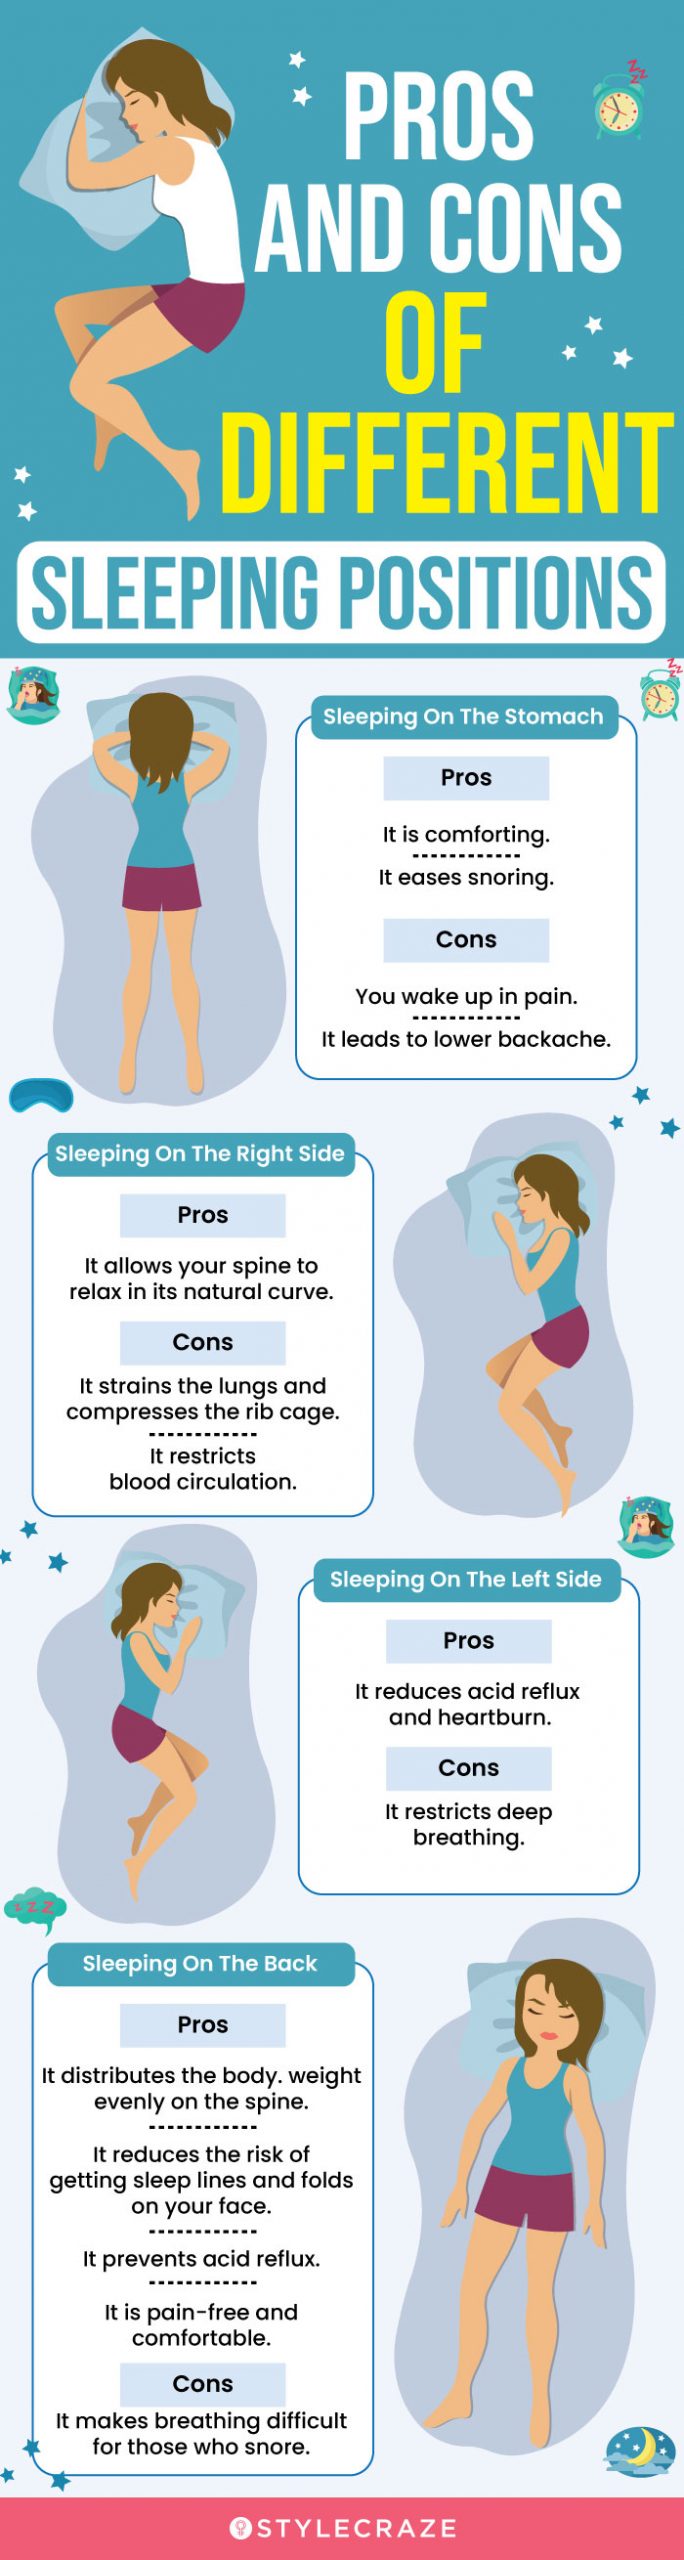 pro sand cons of different sleeping positions (infographic)